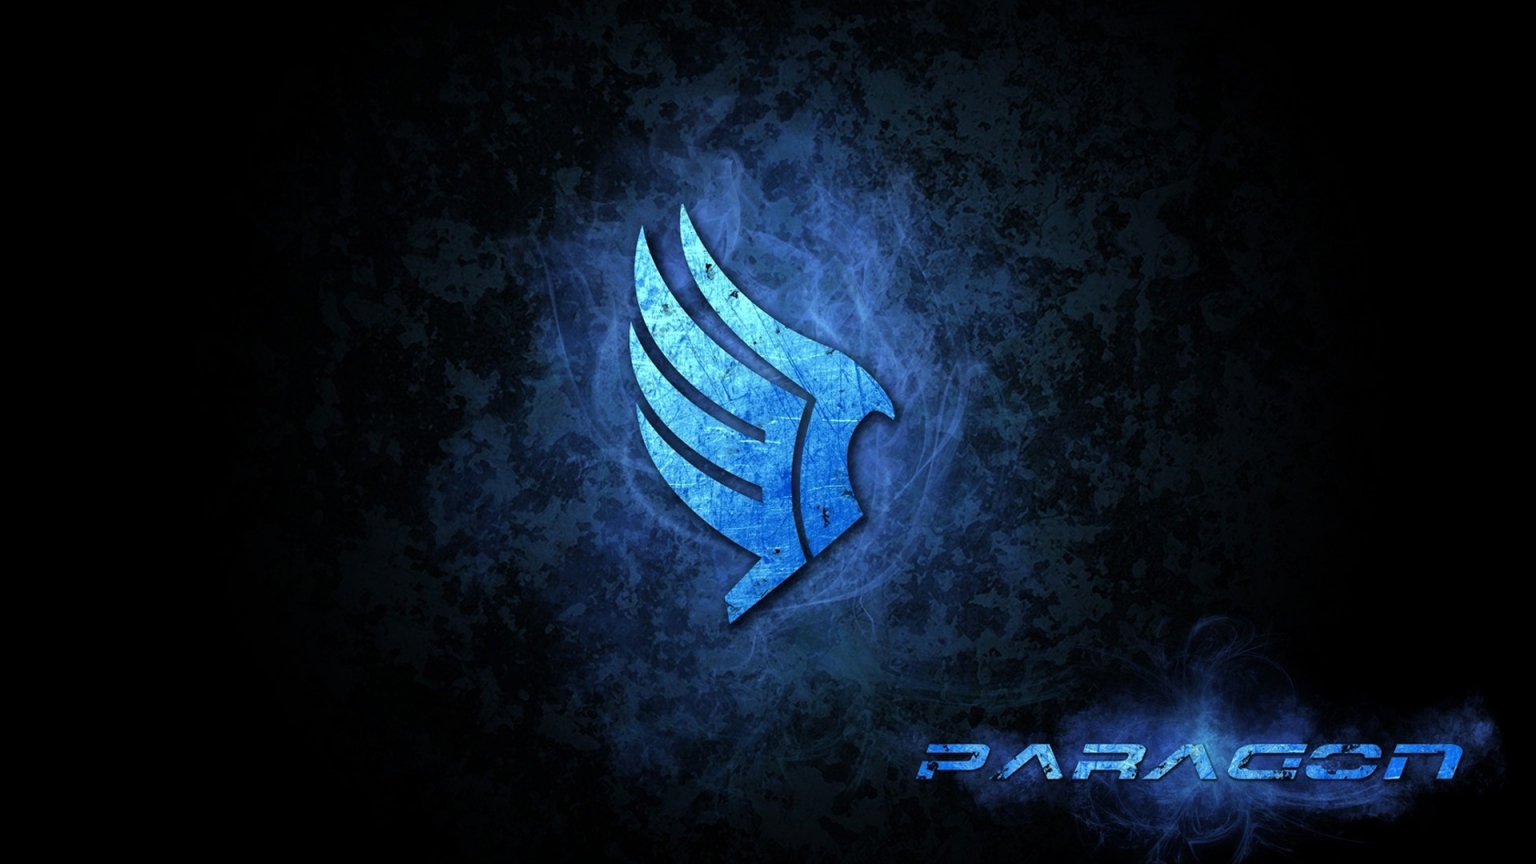 Paragon for 1536 x 864 HDTV resolution